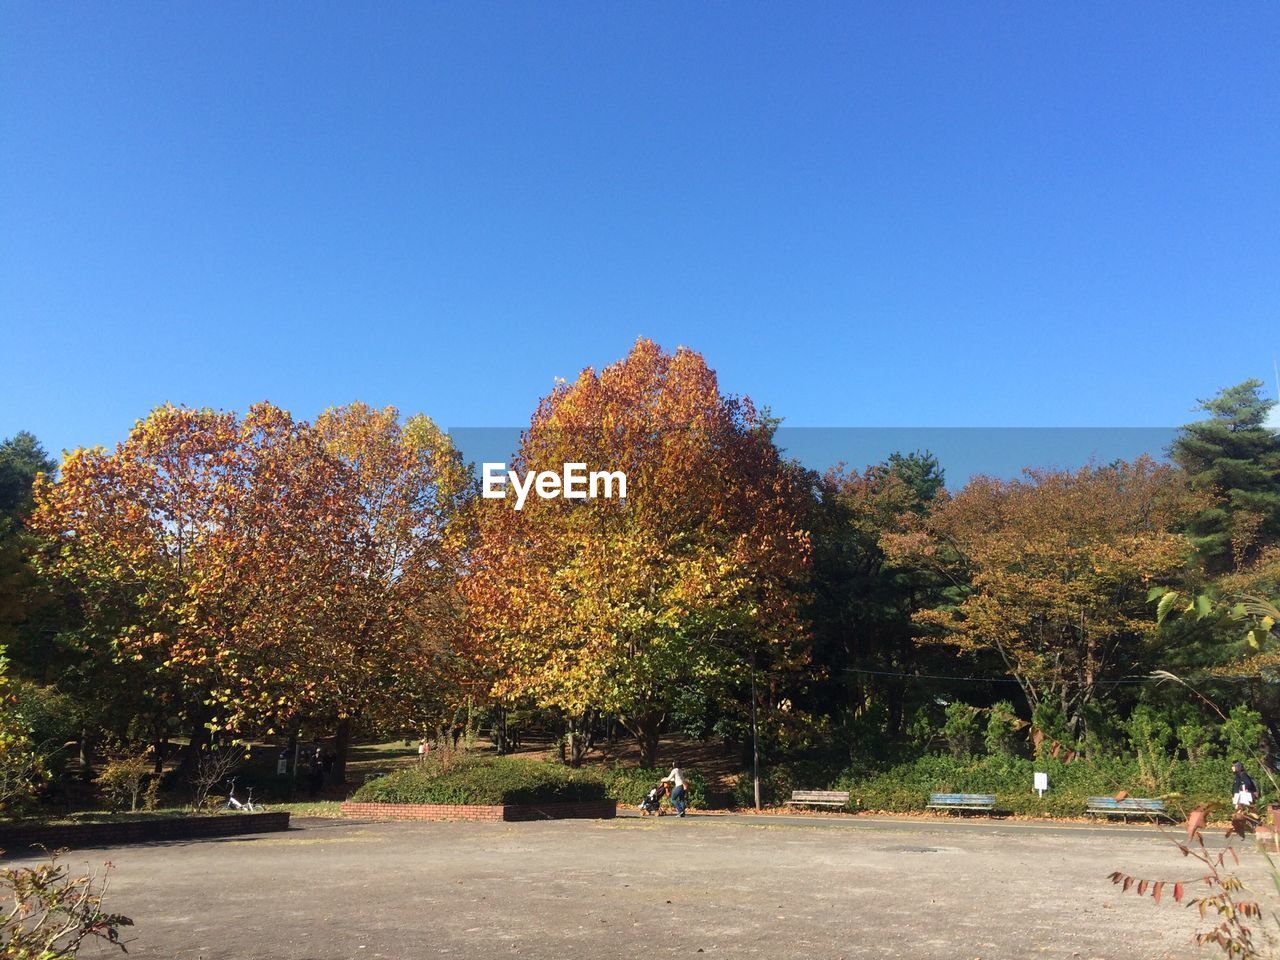 Trees in park during autumn against clear blue sky